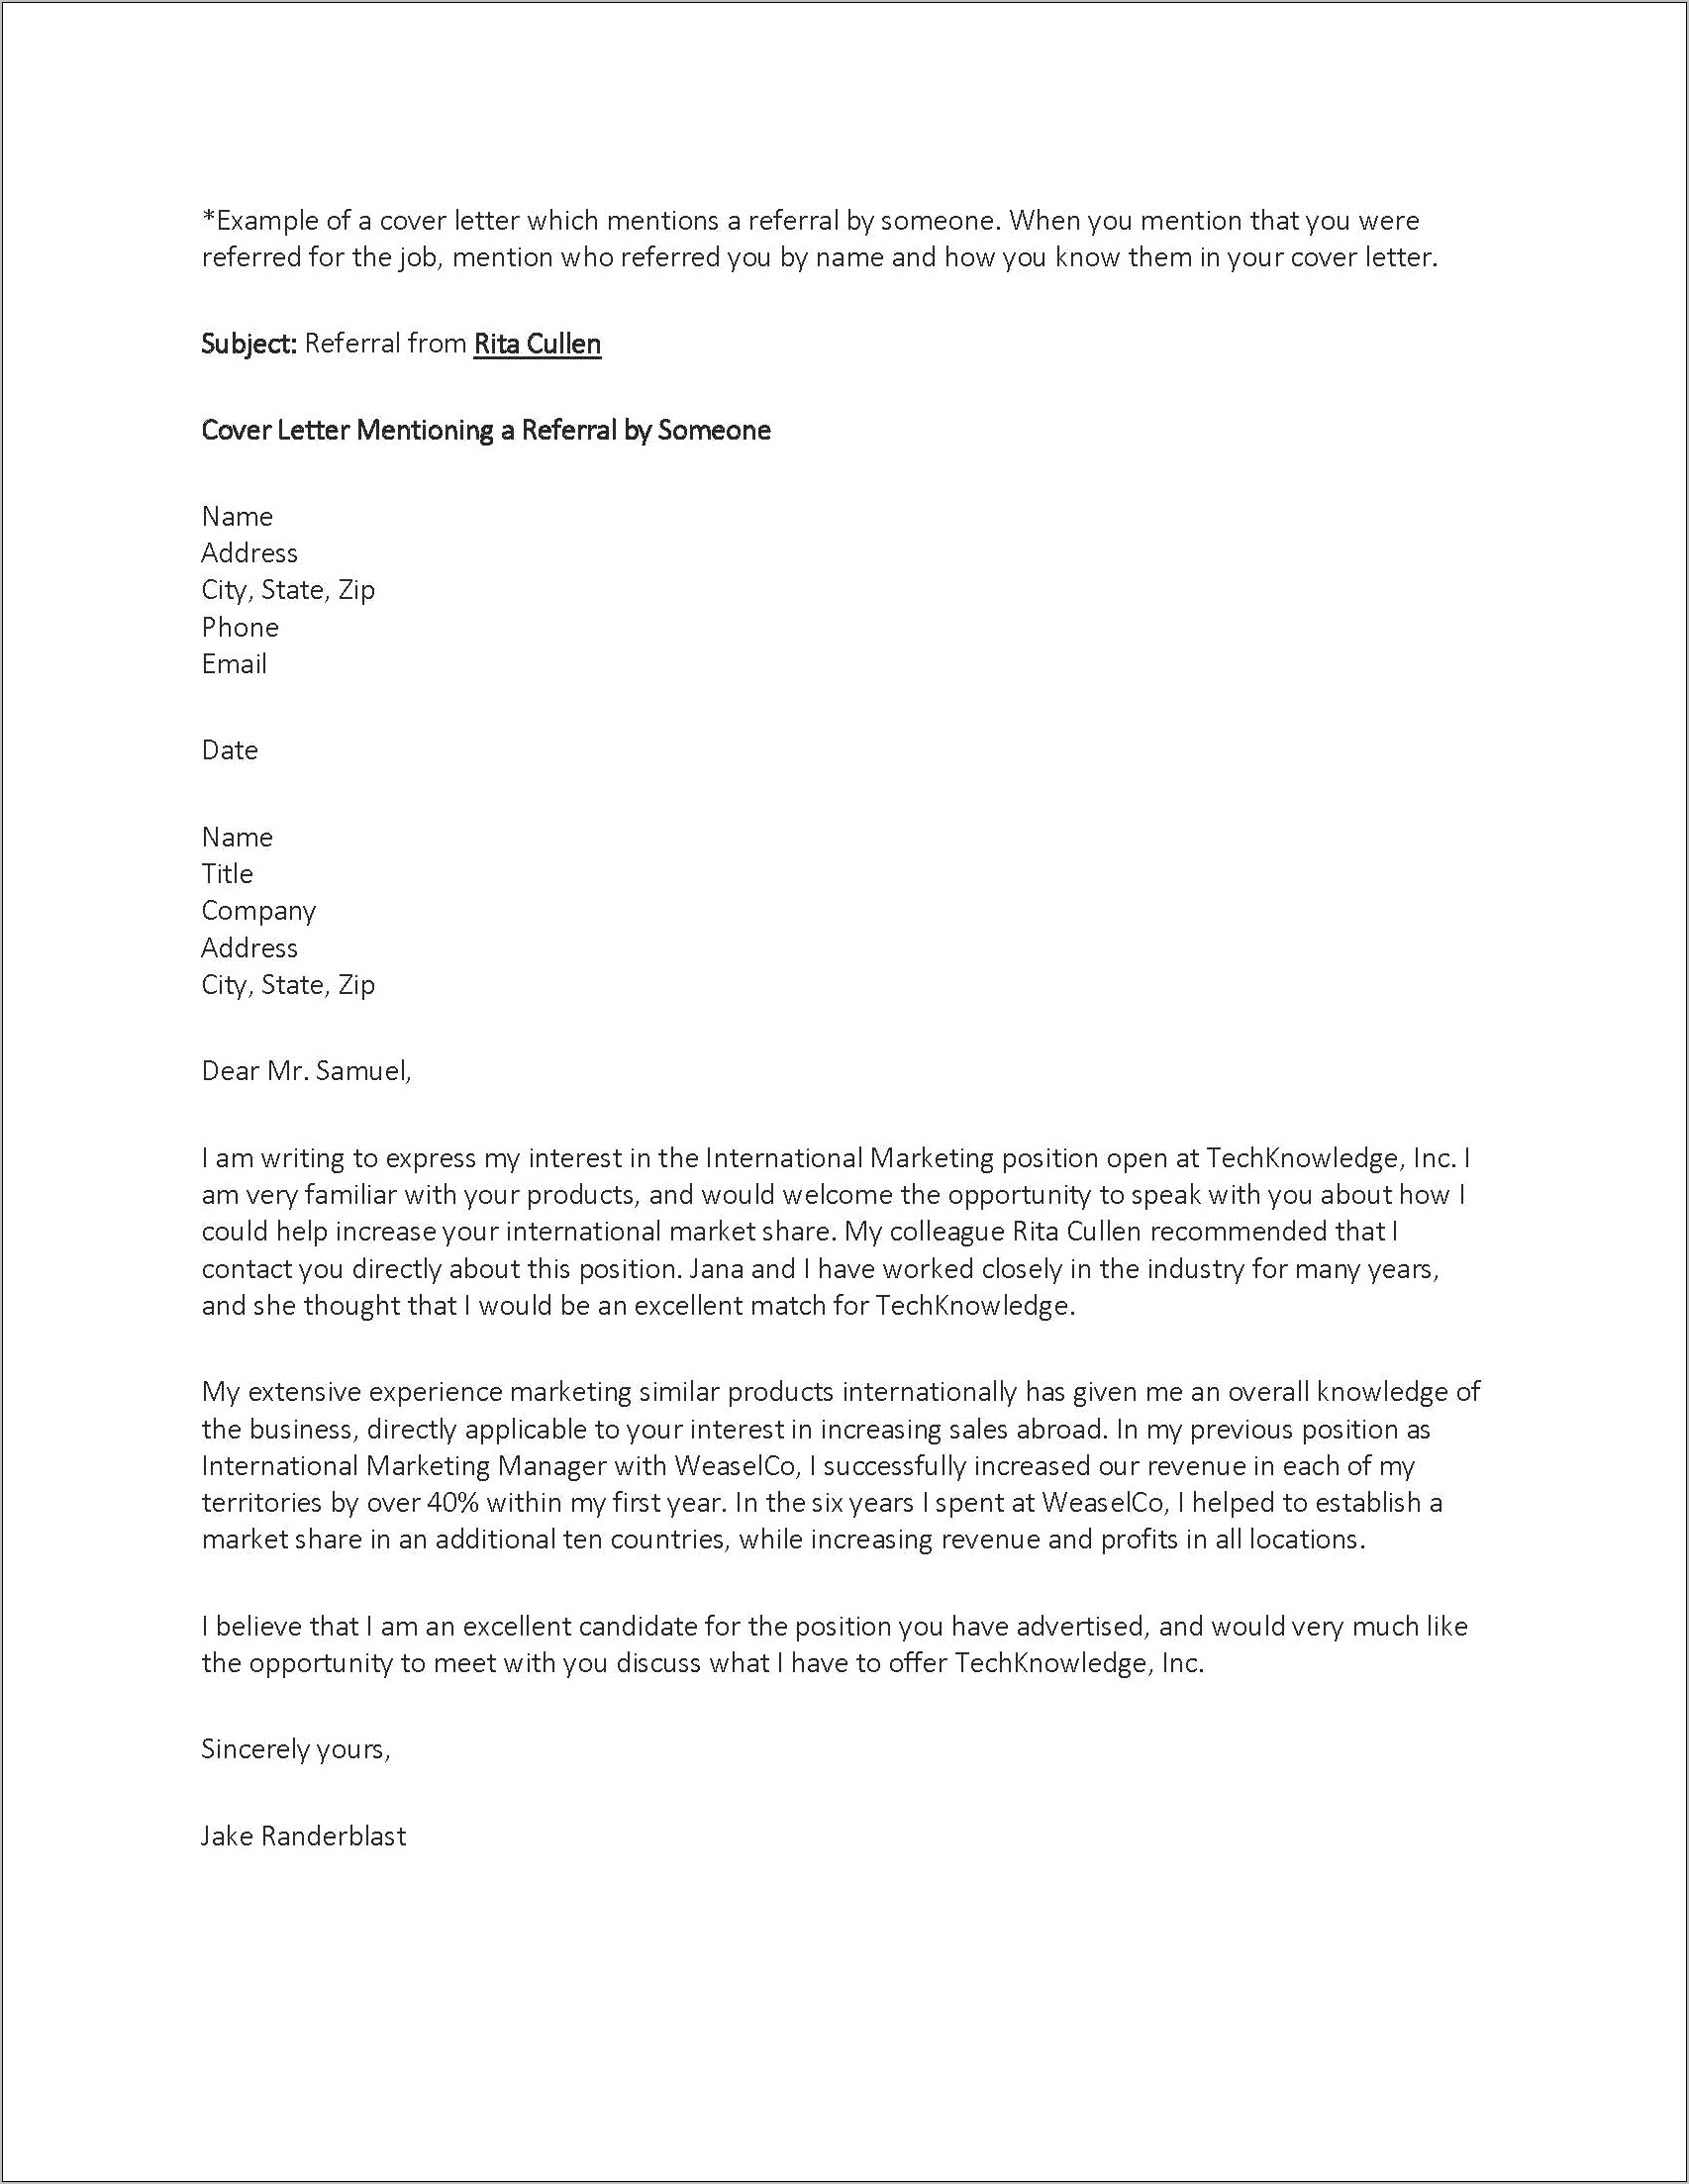 Resume Cover Letter Referred By Someone